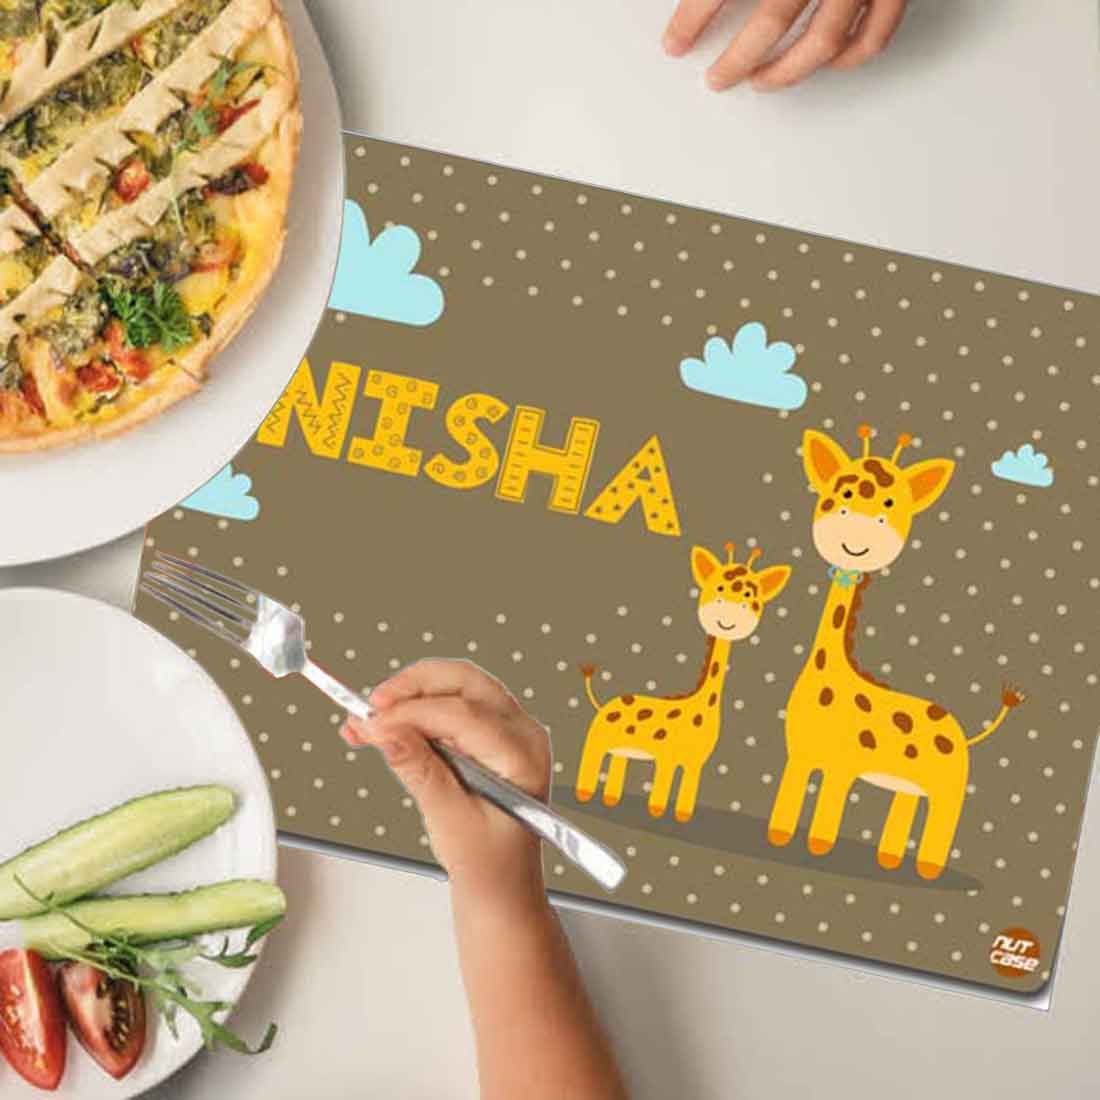 Personalized Table Mats for Kids Birthday Return Gifts Ideas - Giraffe